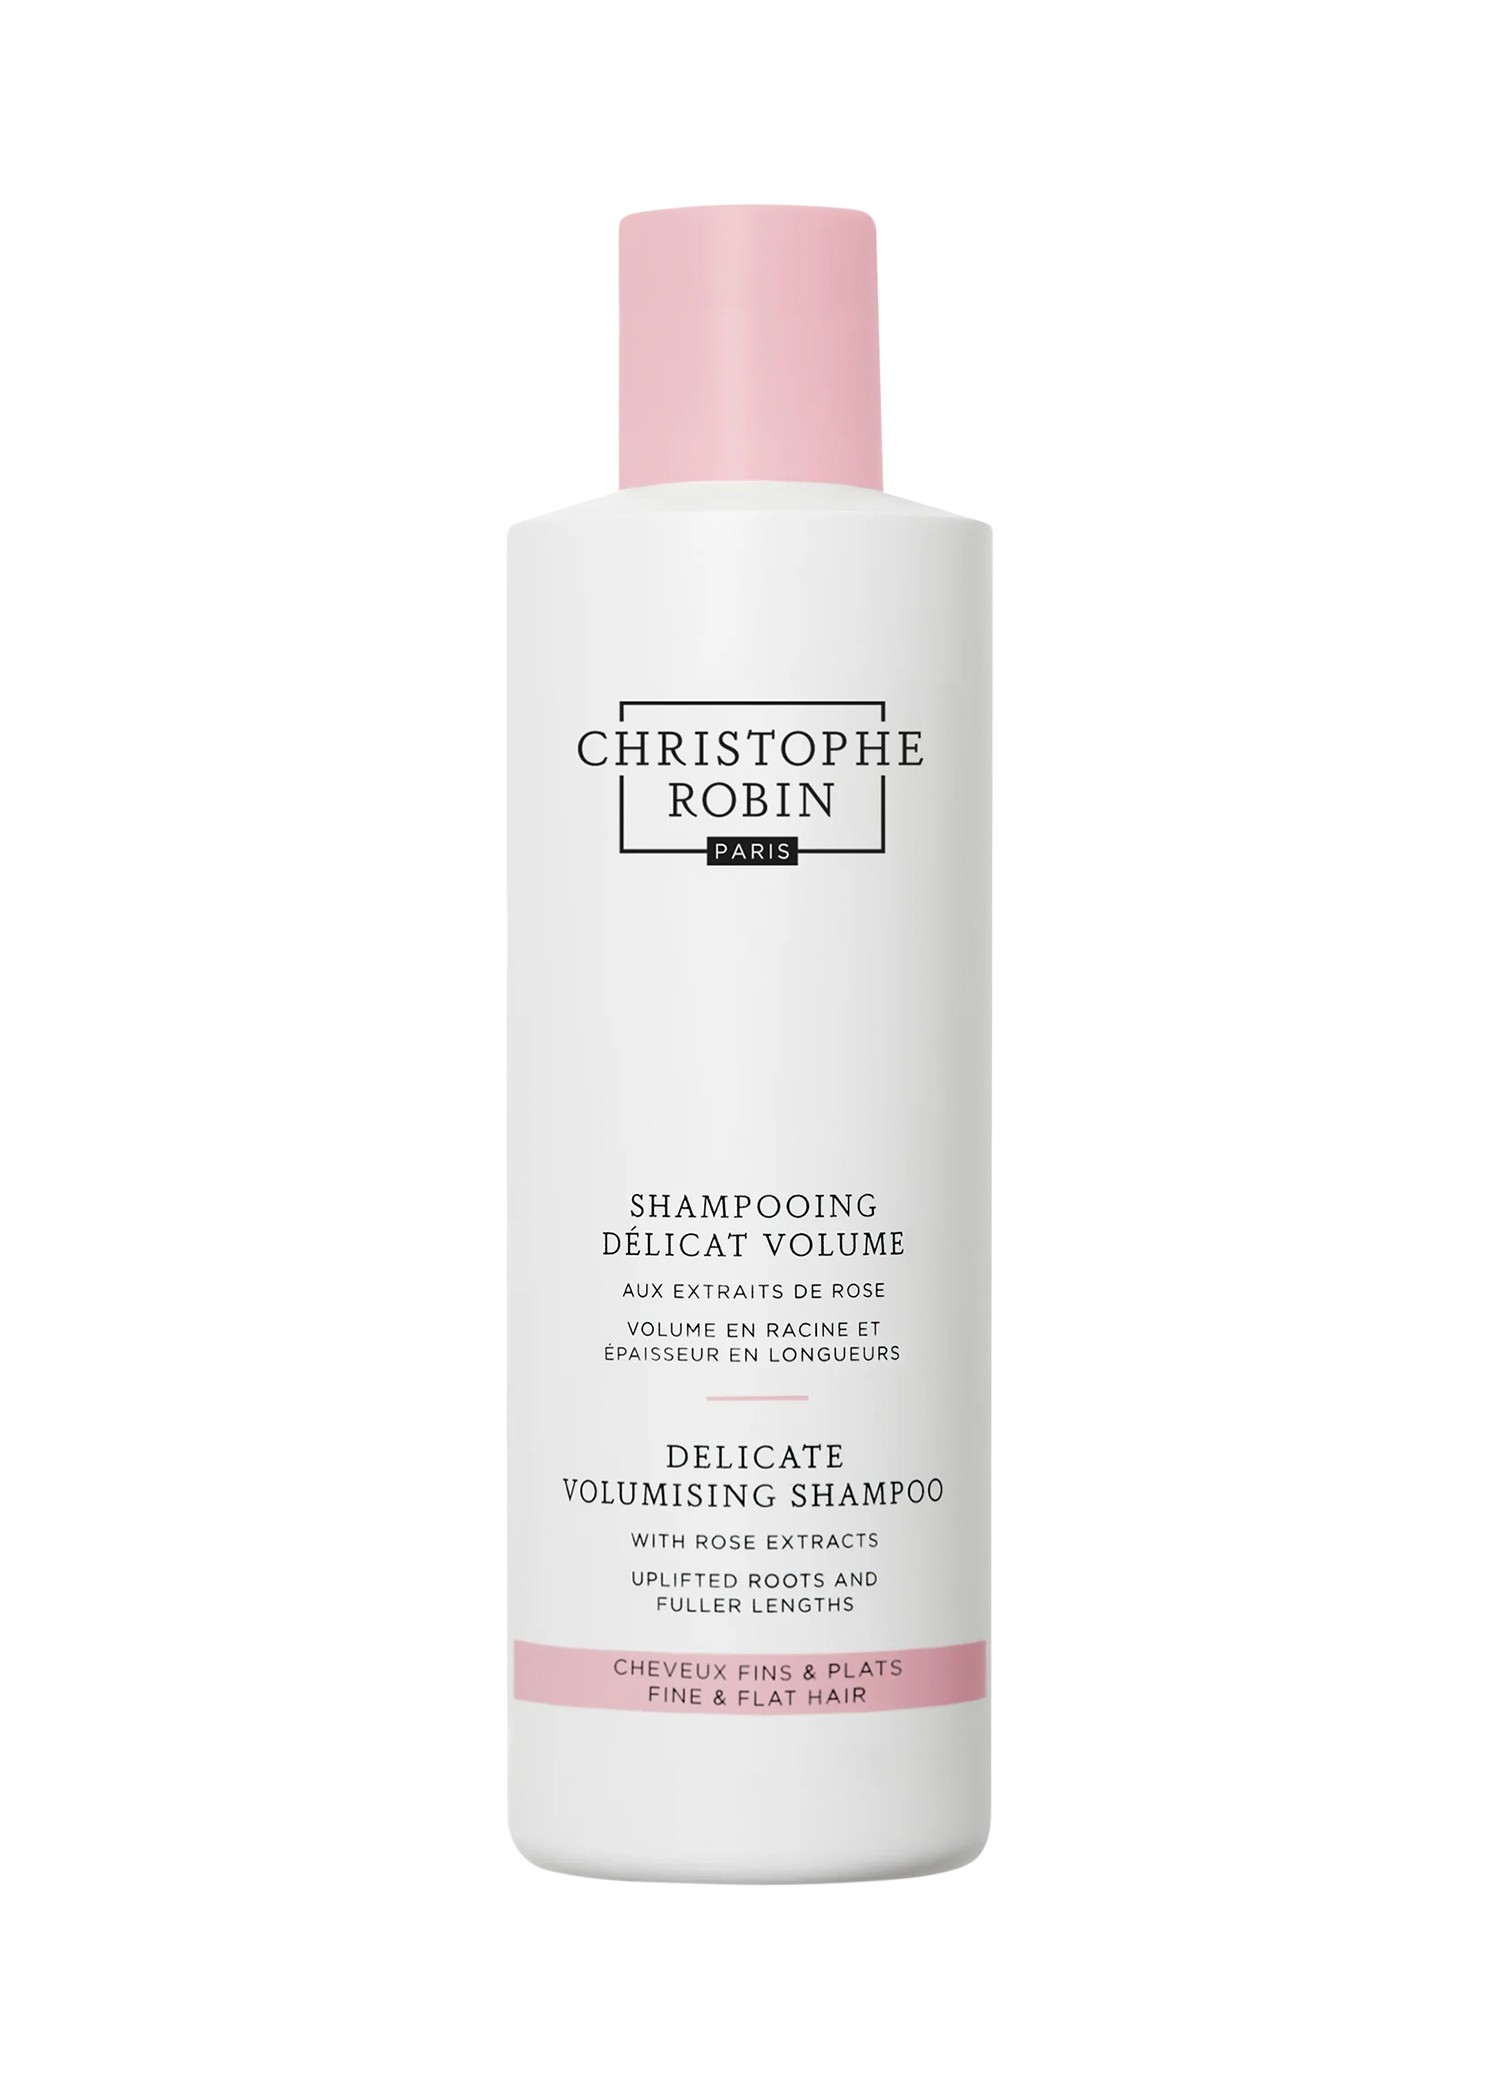 Delicate Volumizing Shampoo with Rose Extracts 150 ml